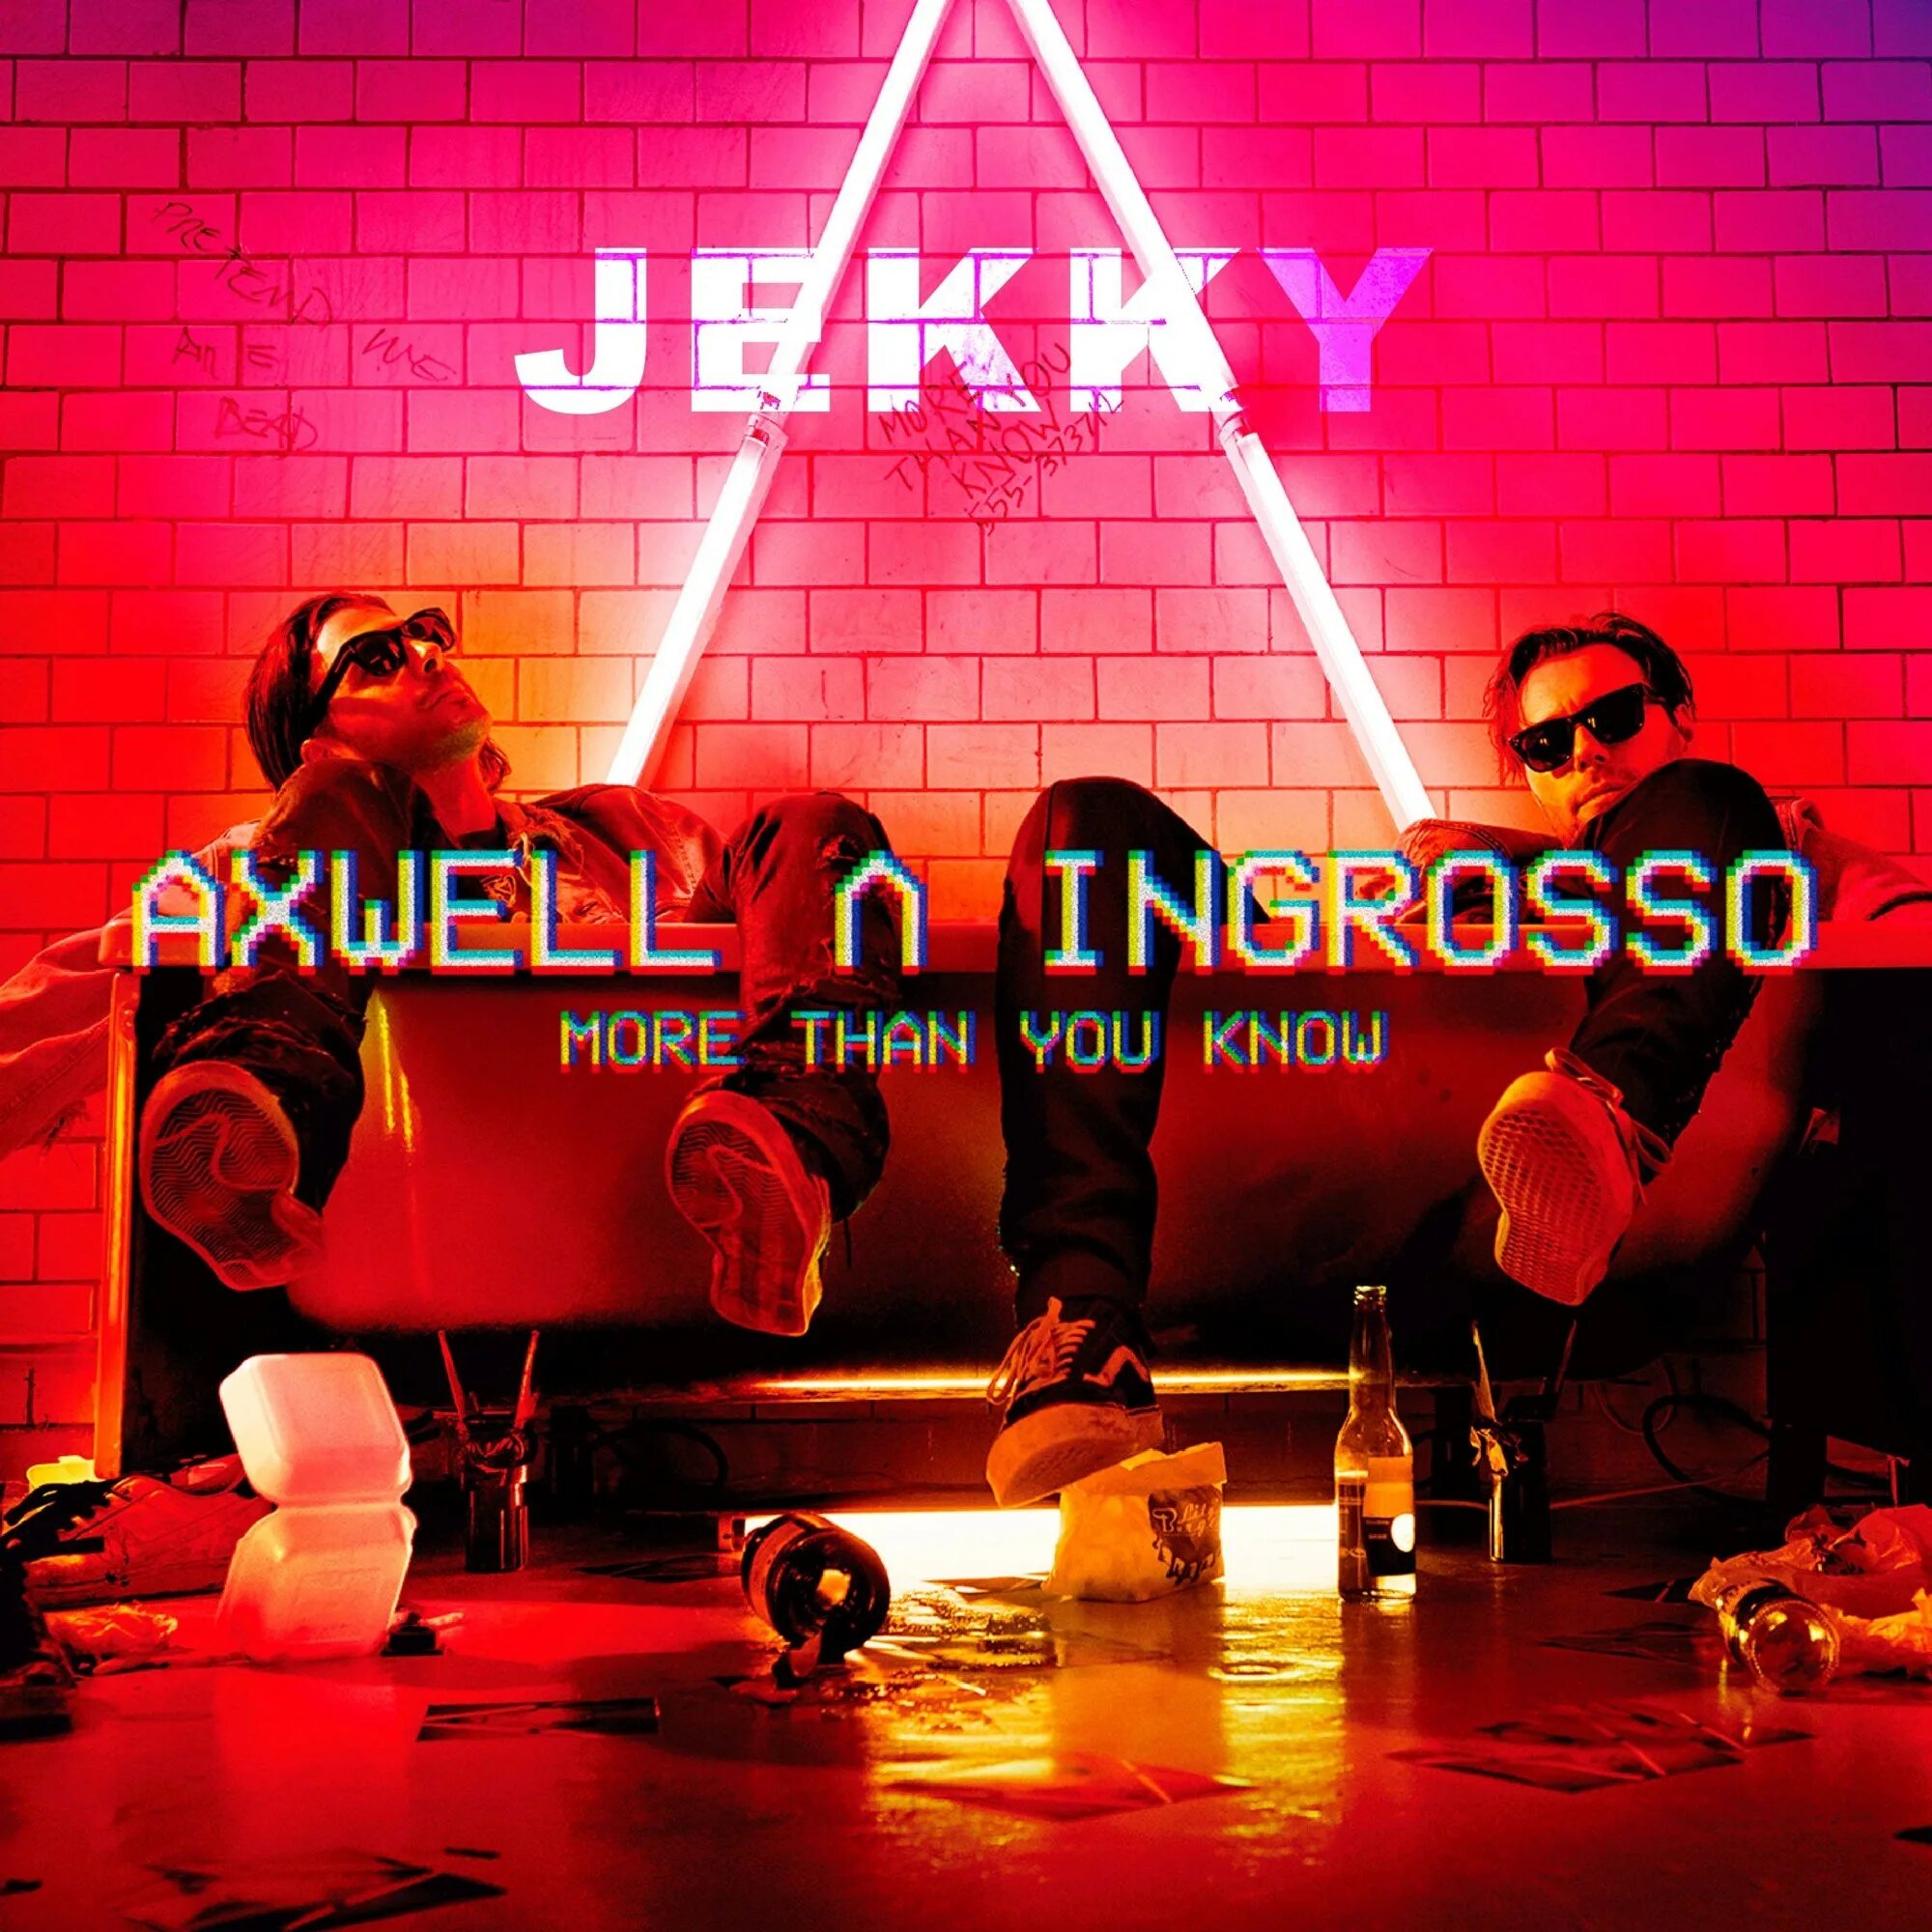 Axwell more than you. More than you know Себастьян Ингроссо. More than you know Axwell ingrosso. More than you know Axwell ingrosso обложка. Axwell ingrosso обложка.